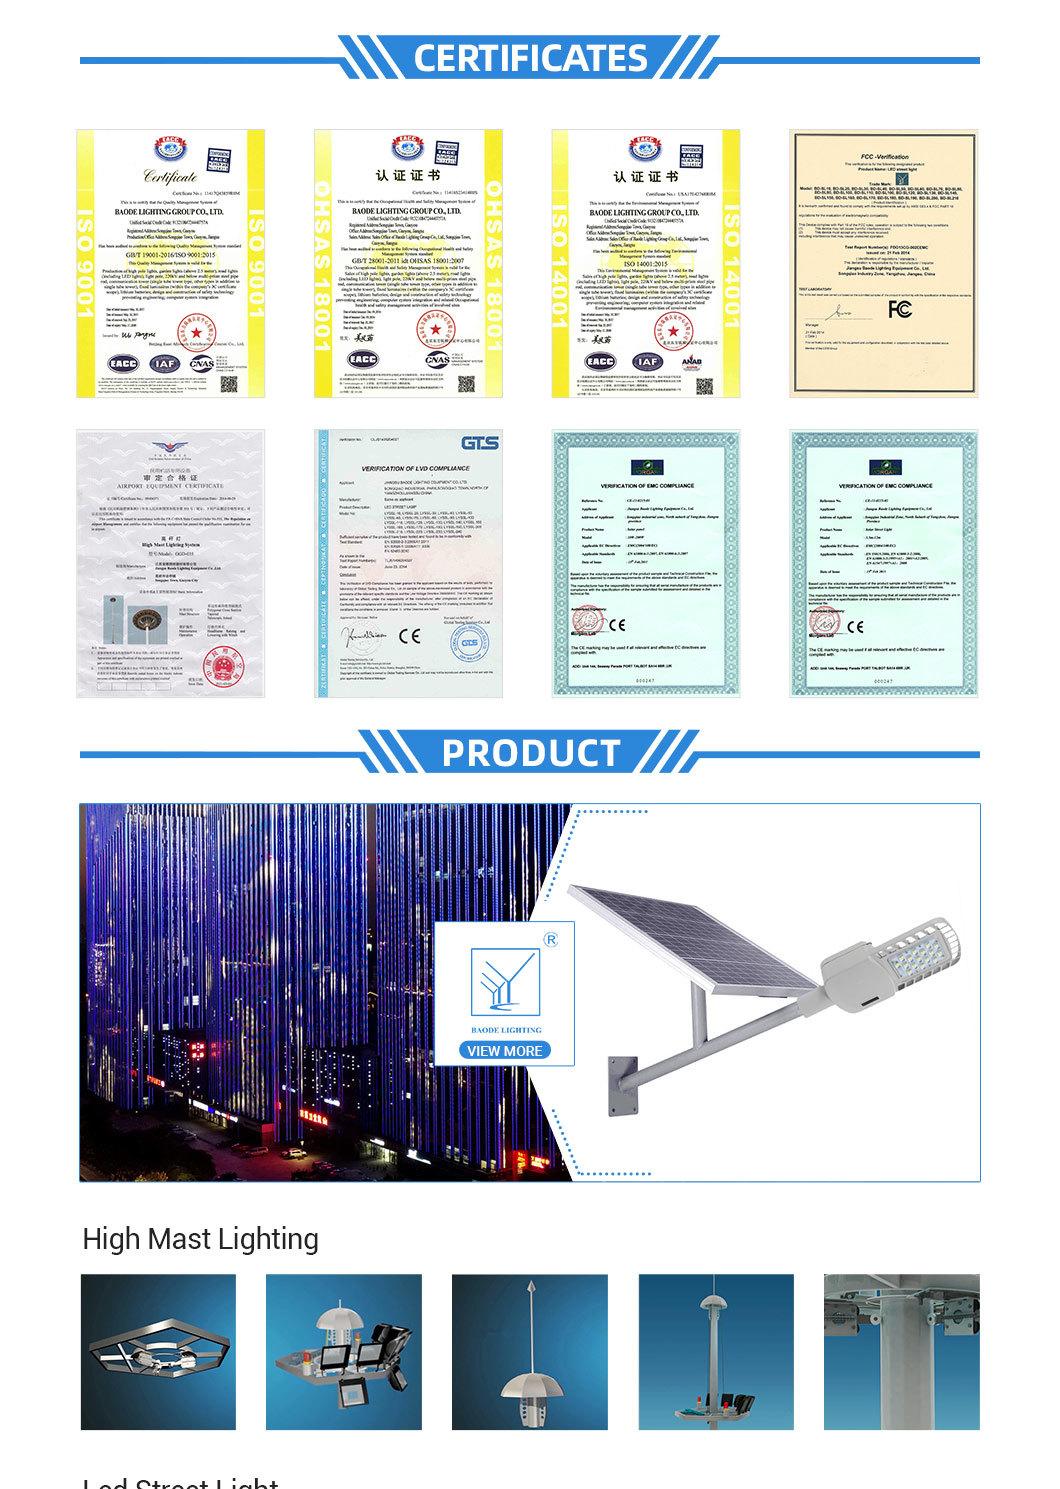 CE/FCC/Rohsapproved Solar LED Street Light (BDLED 35)